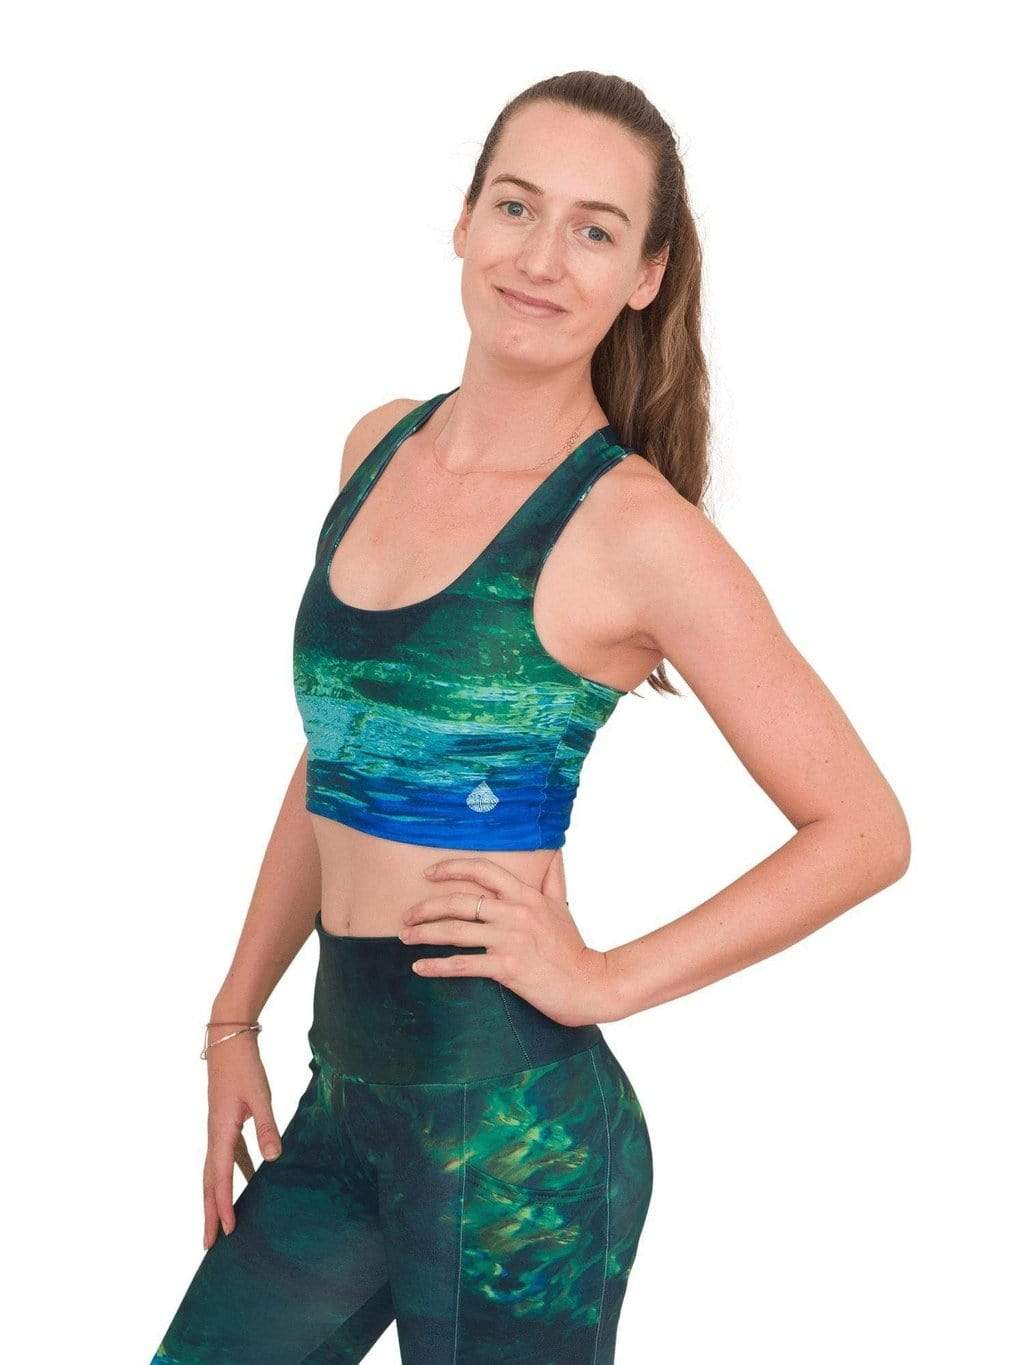 Model: Laura is our Chief Product Officer at Waterlust, a scuba diver, kiter and recreational yogi. She is 5’10, 147 lbs, 34B and is wearing a size S top and M legging.